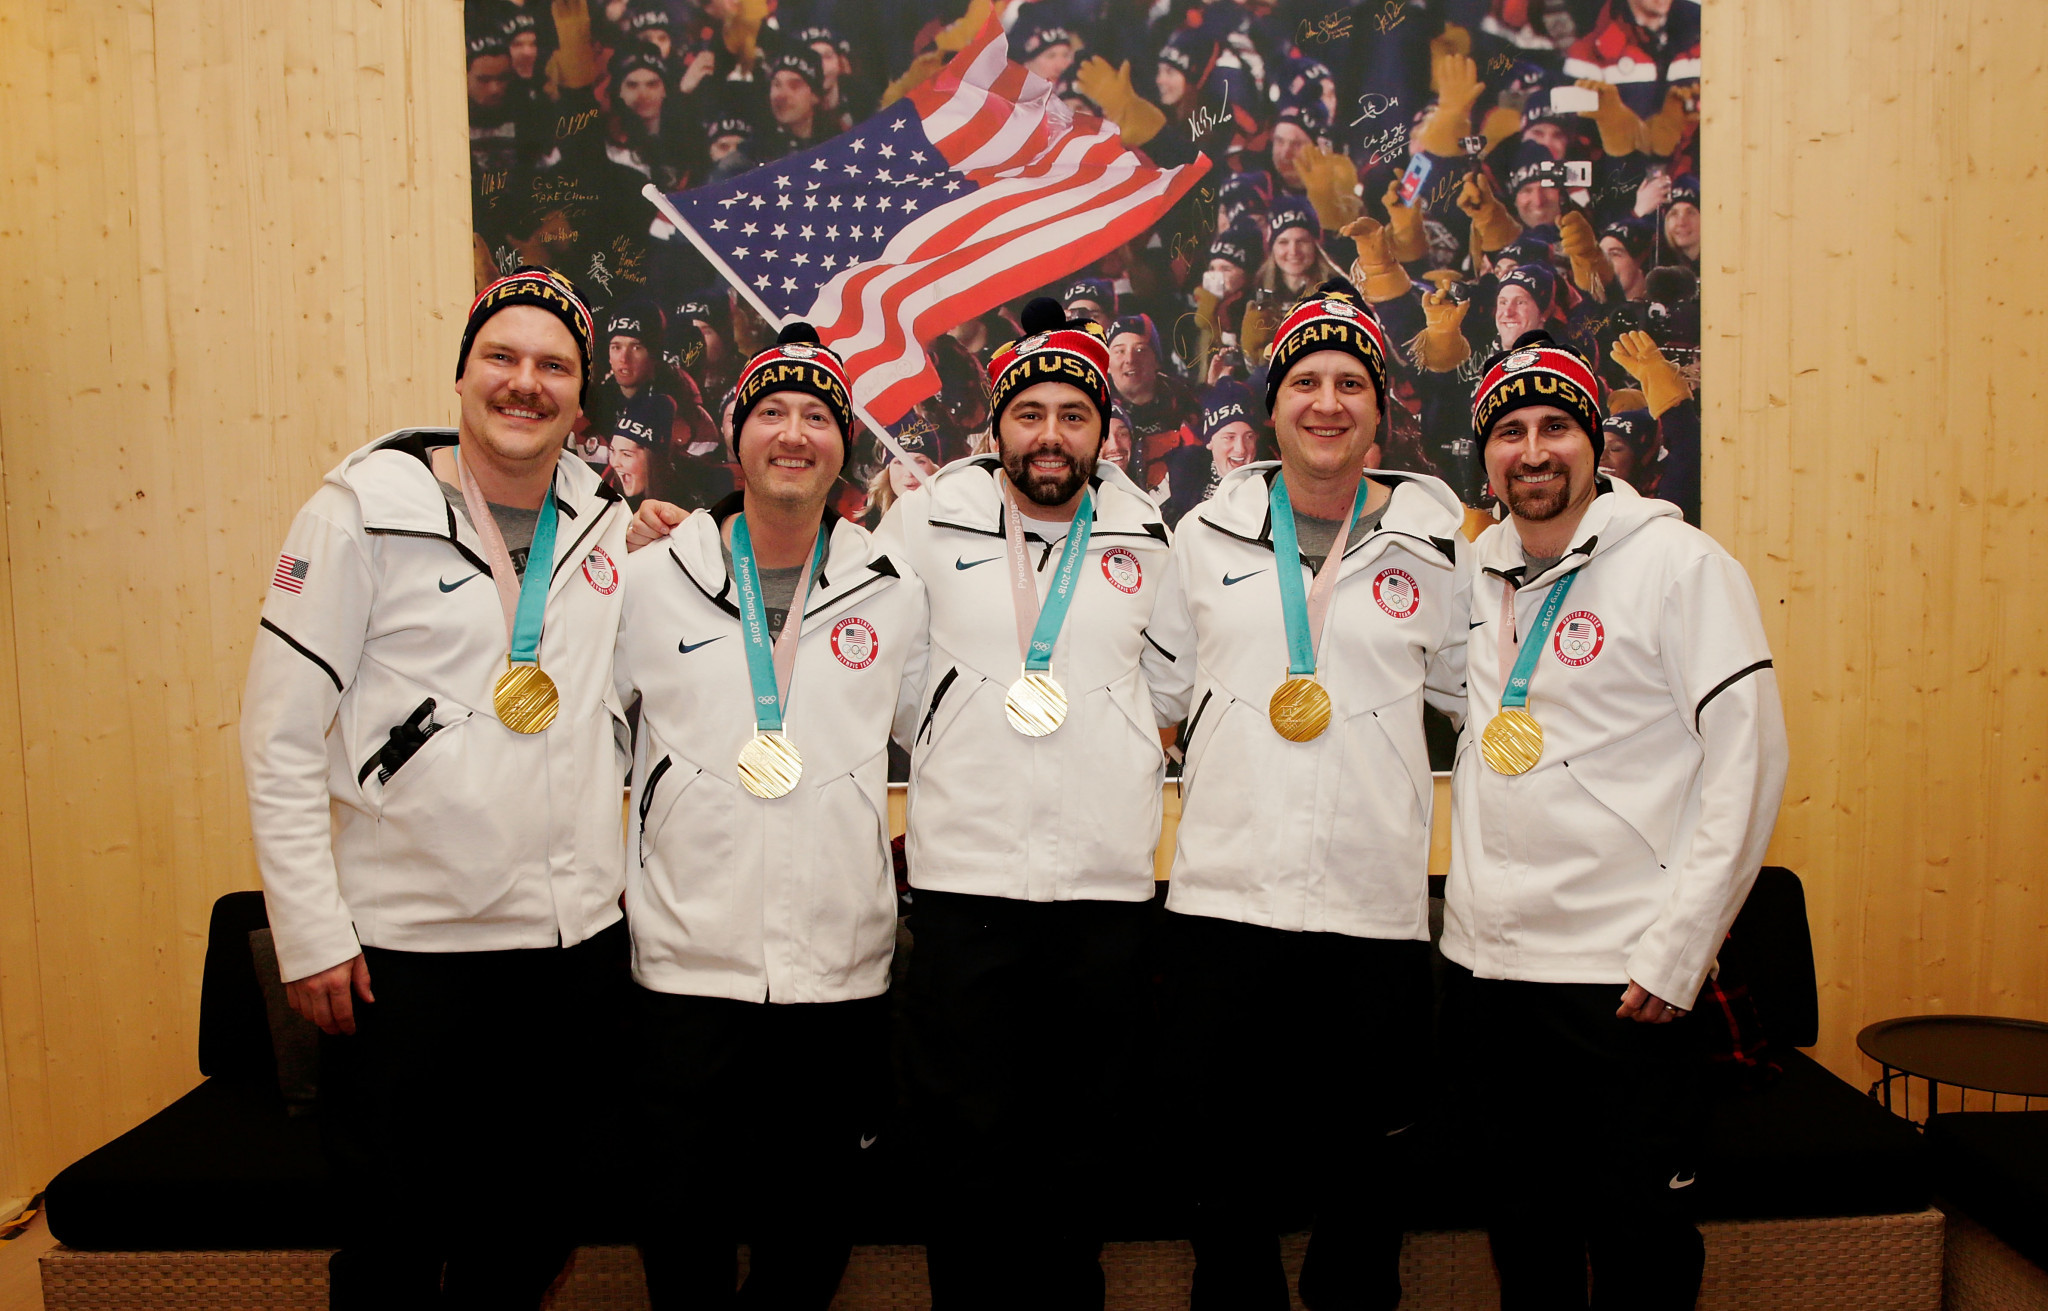 America's men's curling team of Matt Hamilton, John Shuster, John Landsteiner, Tyler George and Joe Polo won the Olympic gold medal at Pyeongchang 2018, sparking a huge upsurge of interest in the sport ©Getty Images